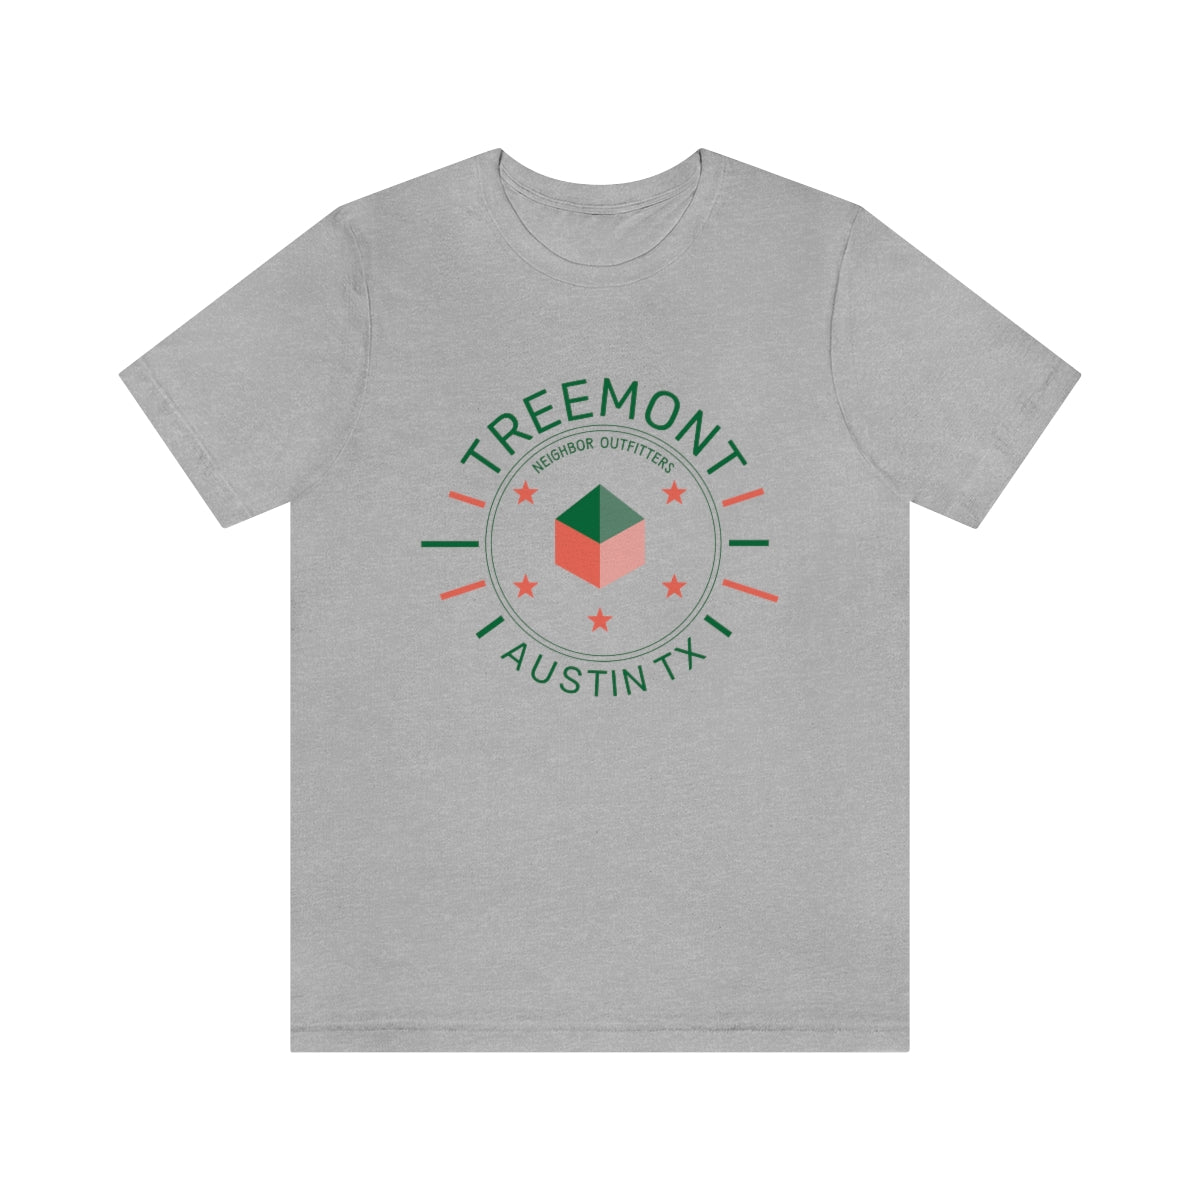 Treemont T-Shirt: "Center of the Universe"